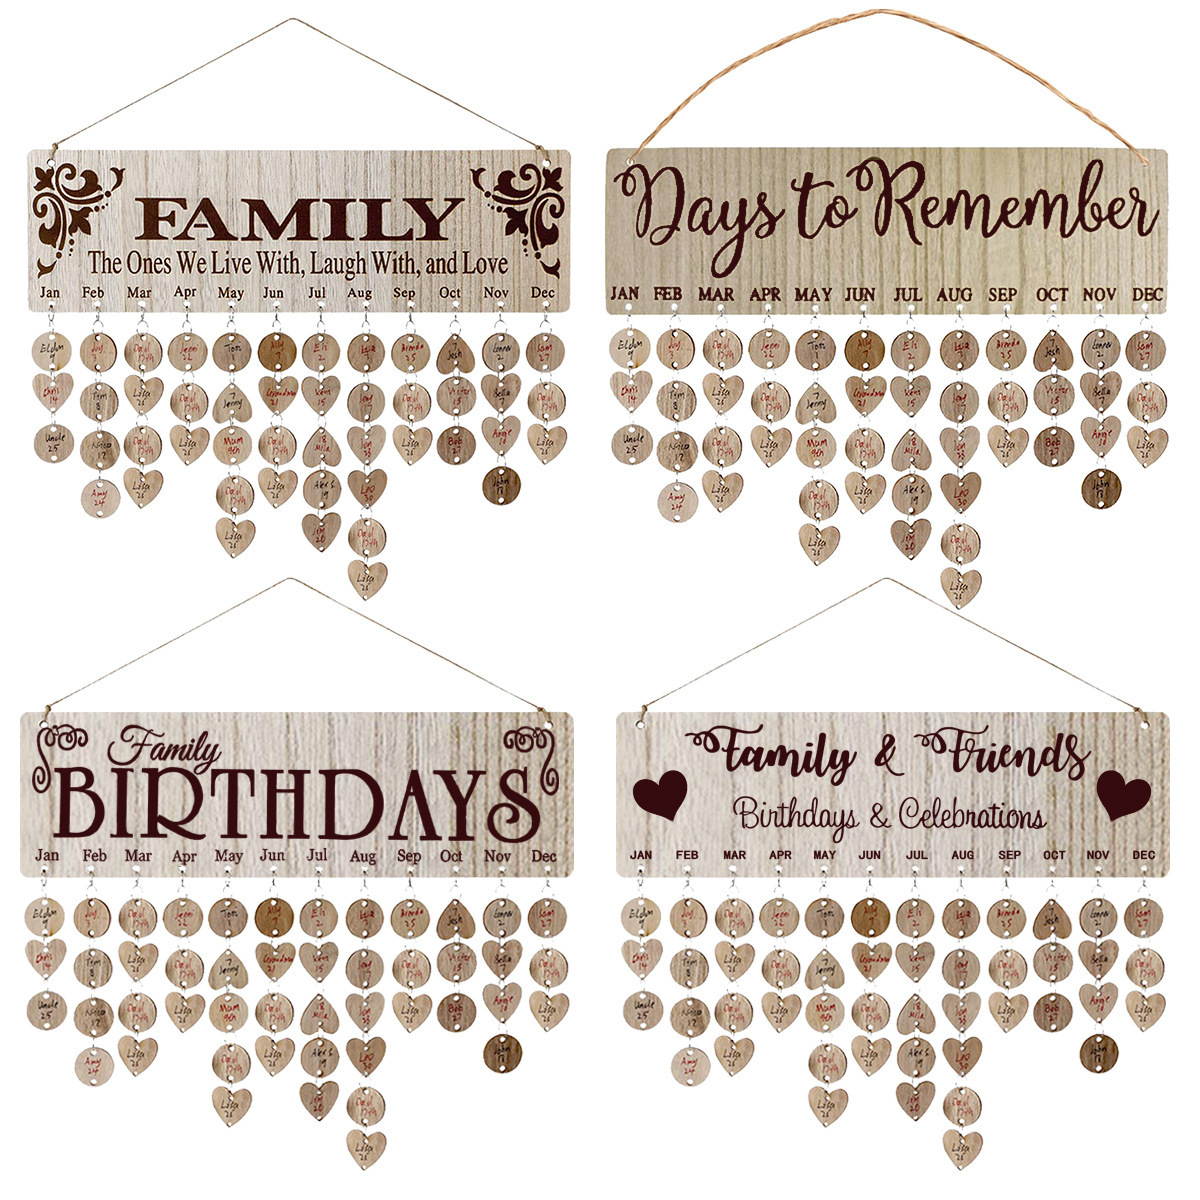 

1pc Family Birthday Board, Diy Wooden Calendar Wall Hanging Birthday Reminder Plaque, With 100 Wooden Tags, Great Gift For Mom Grandma, Birthday